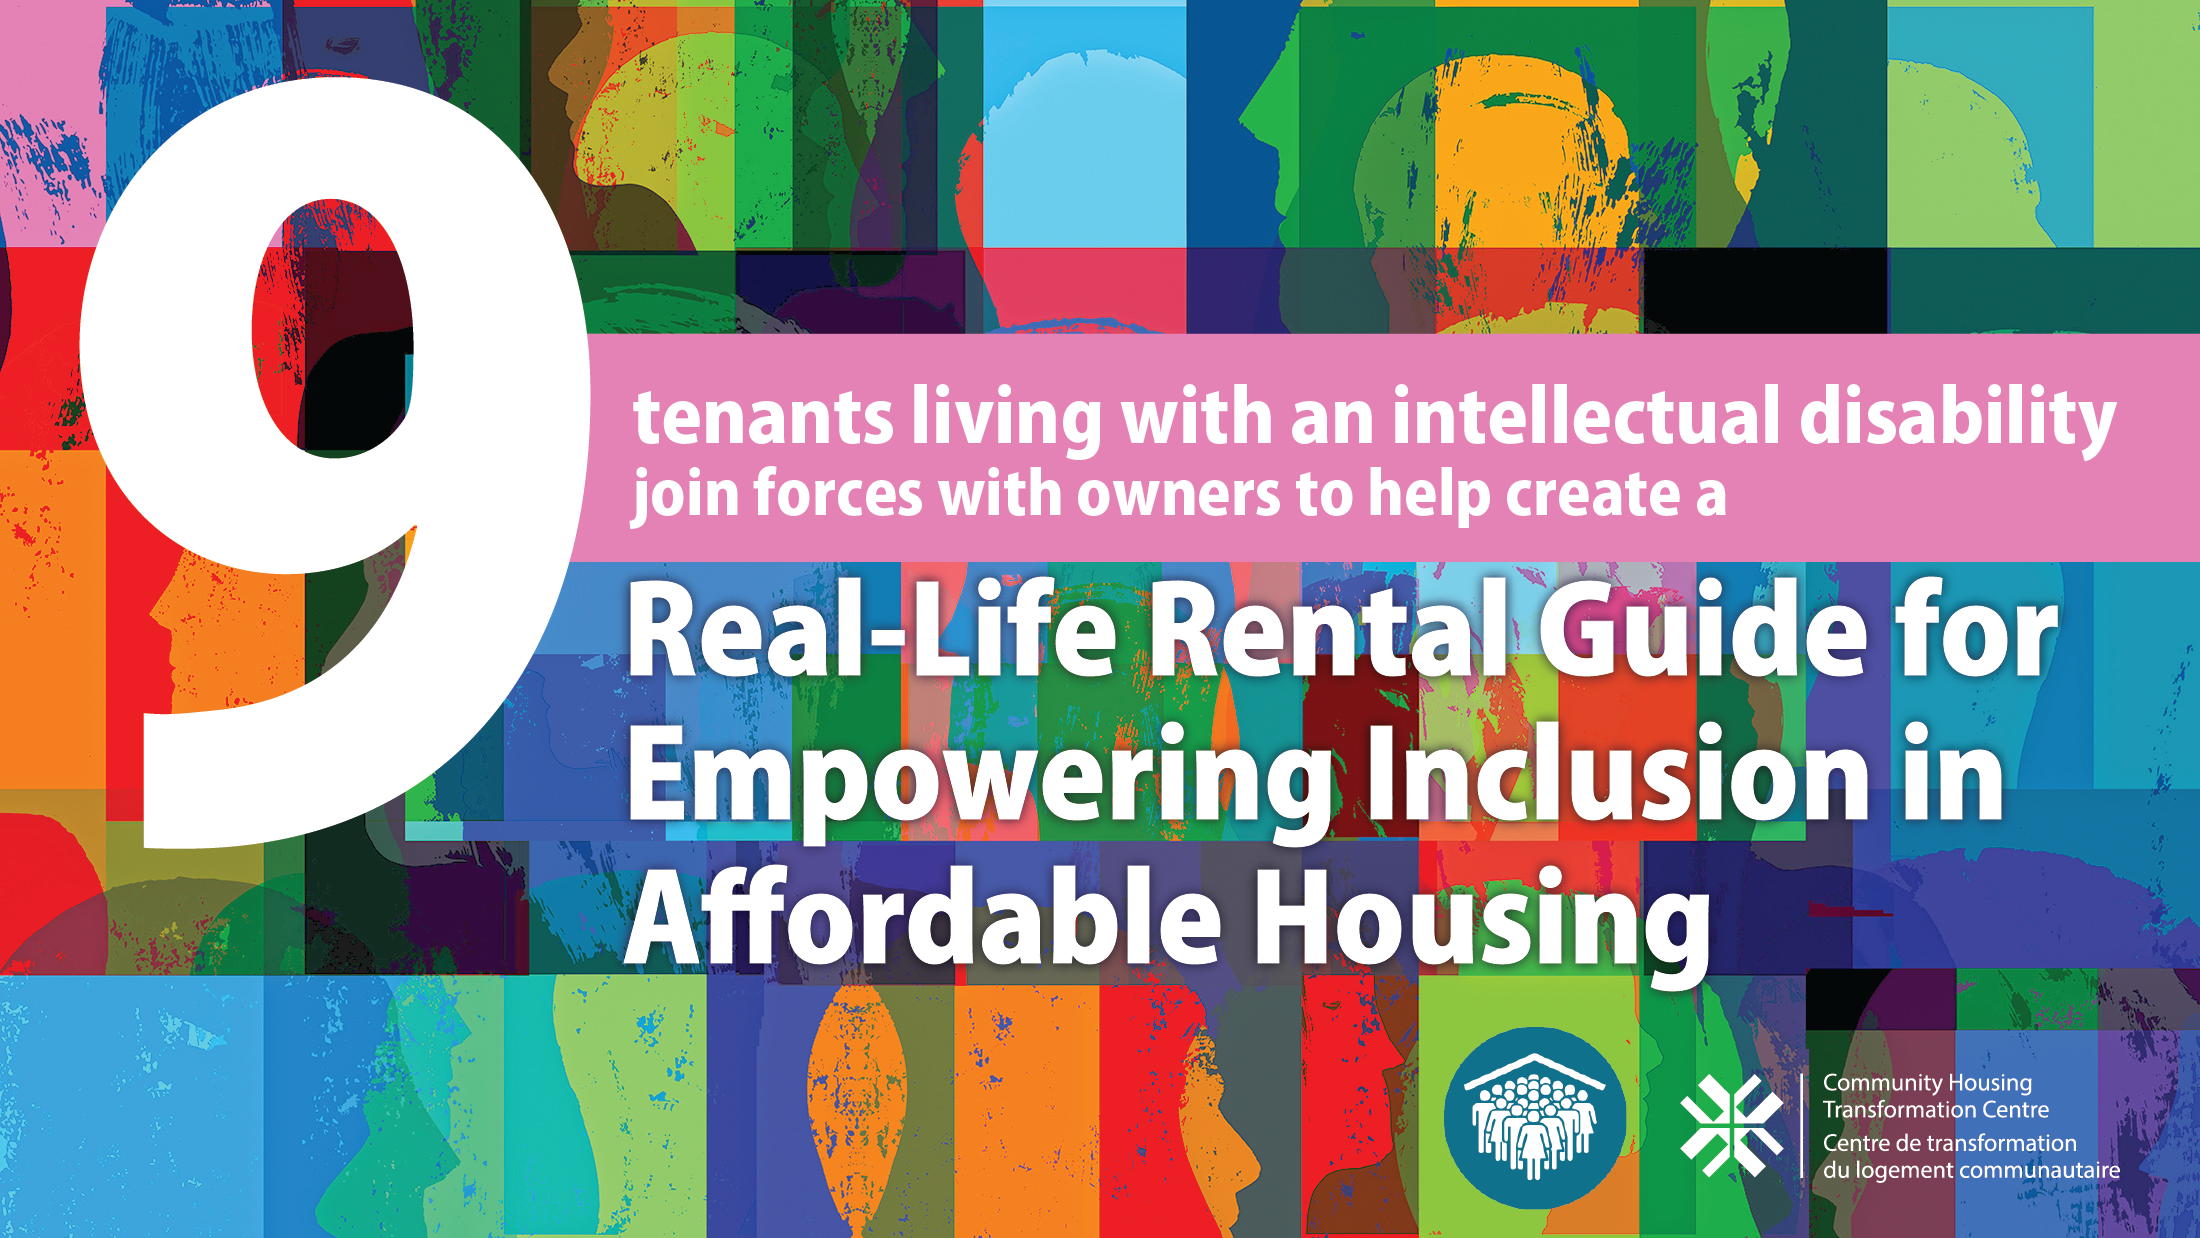 Real-Life Rental Guide for Empowering Inclusion in Affordable Housing